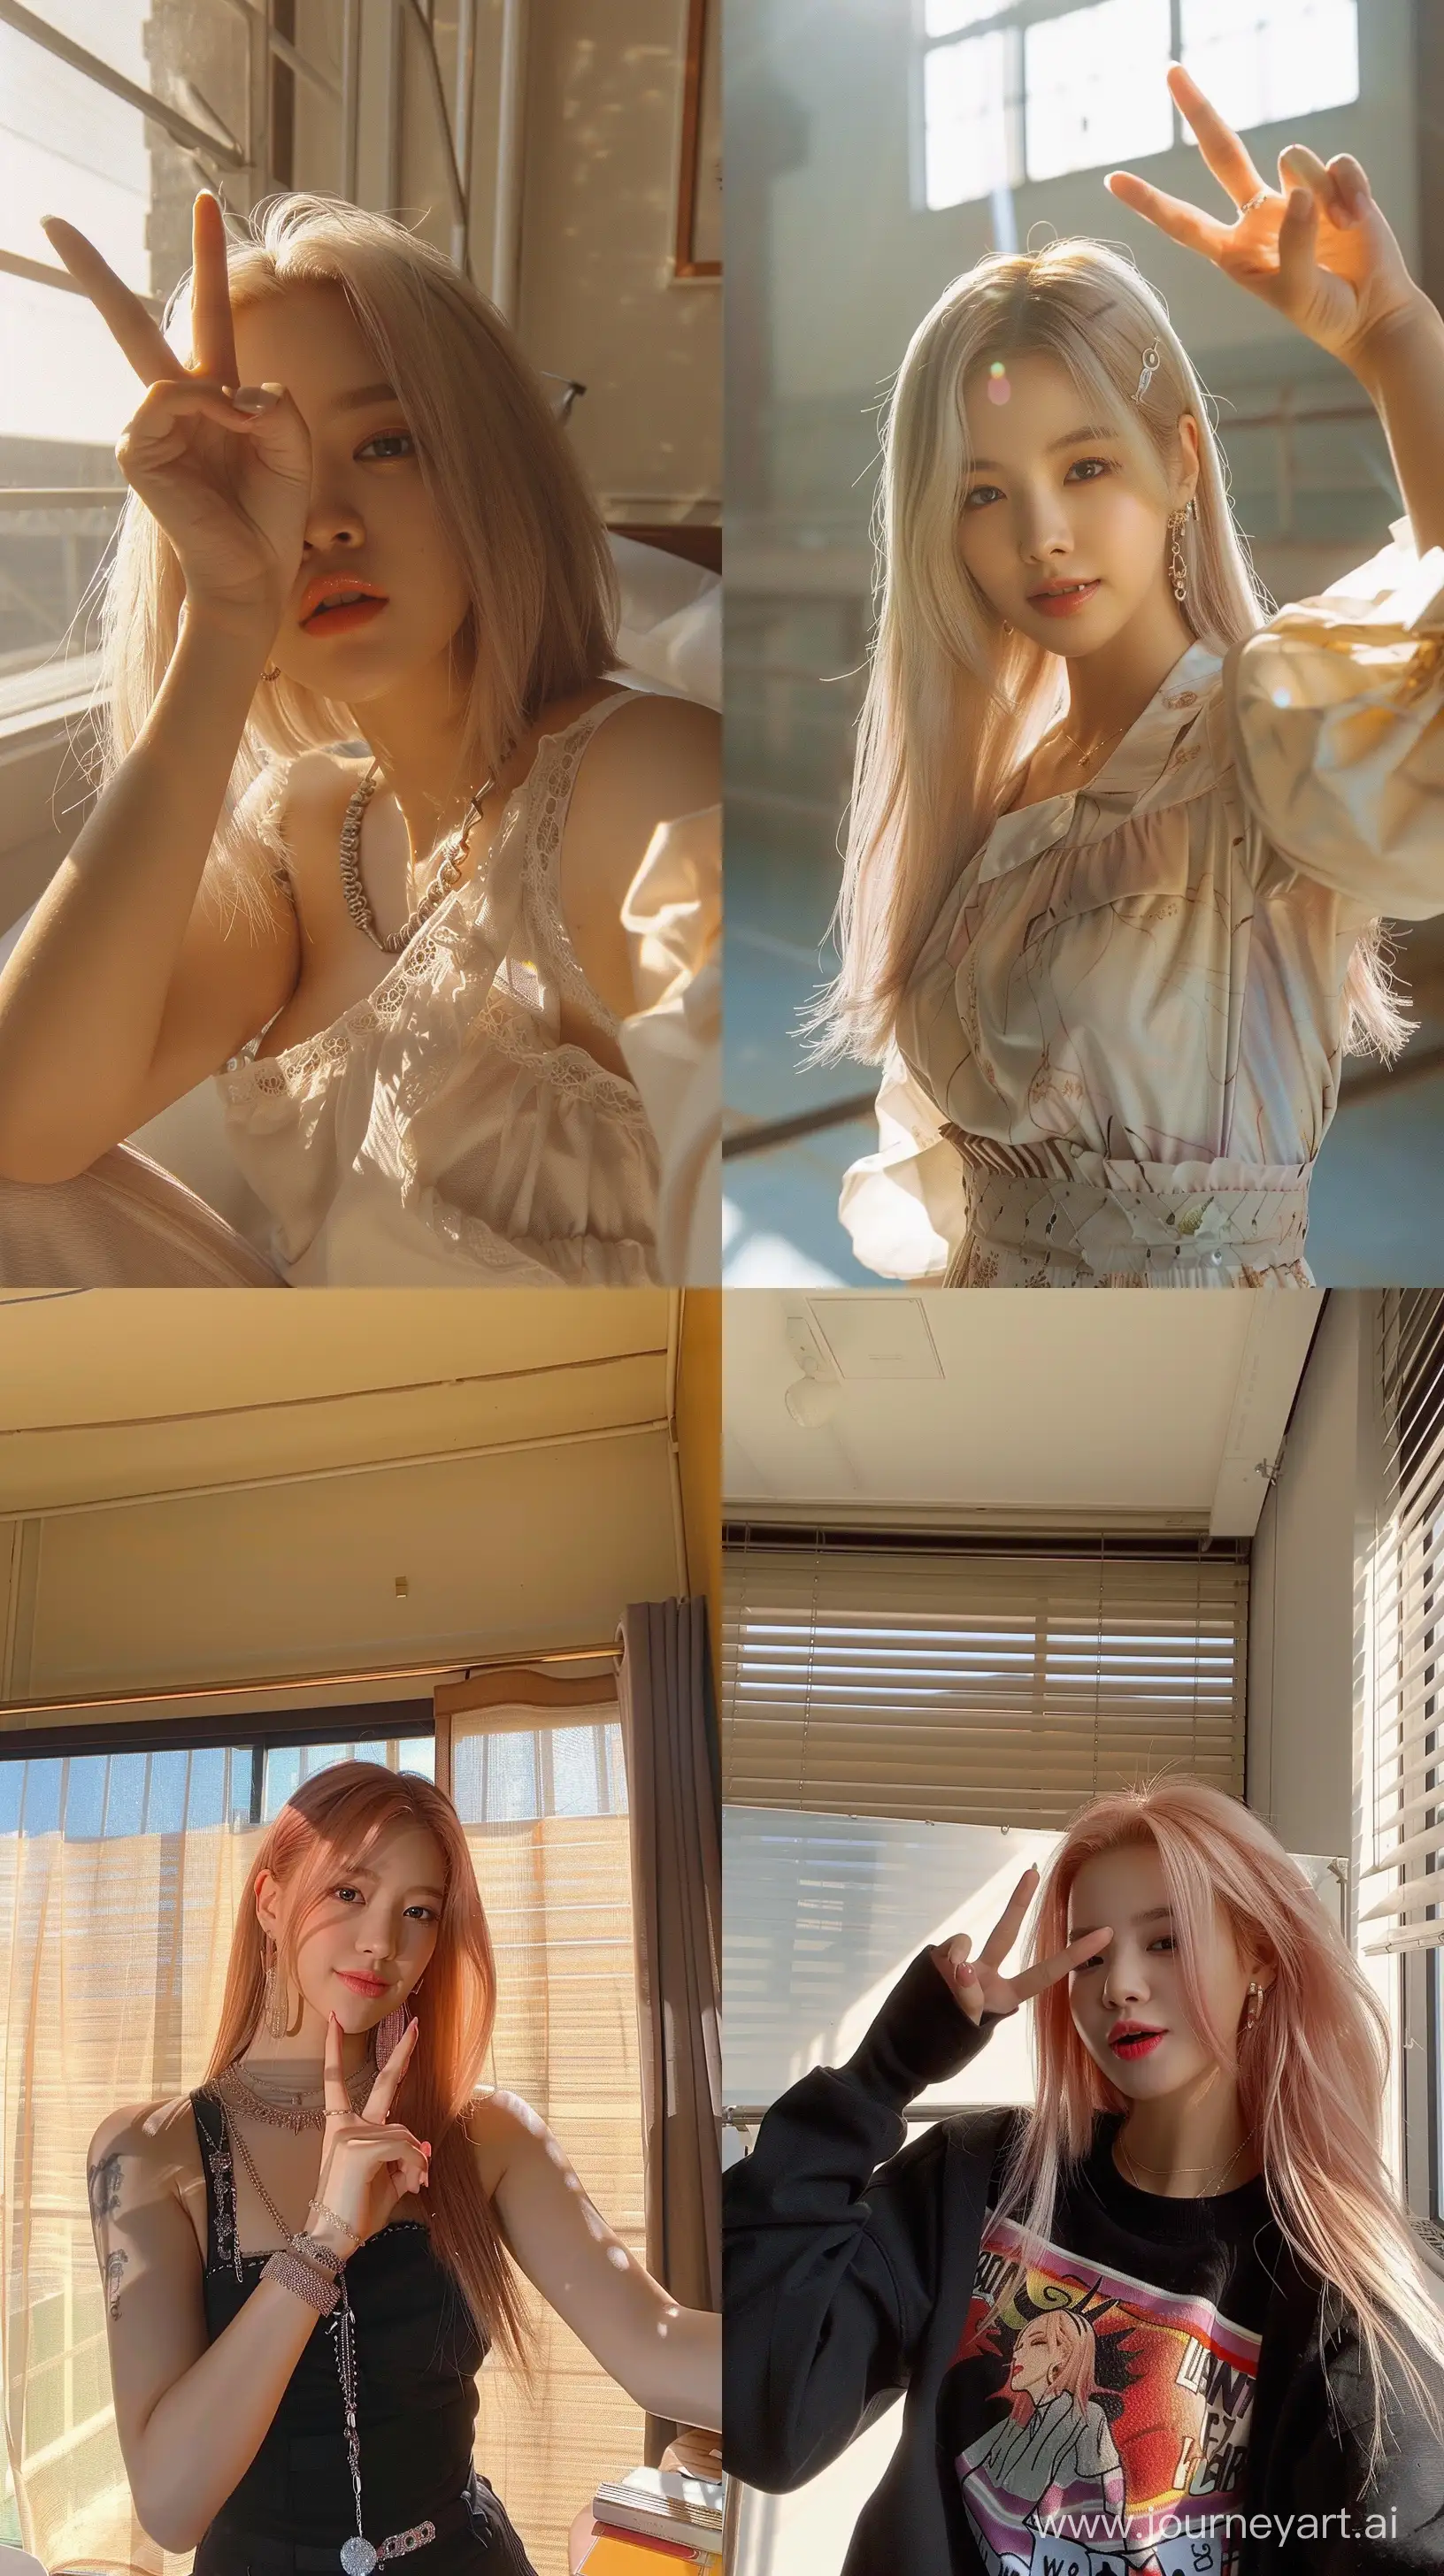 Blackpinks-Jennie-Sunlit-Room-Selfie-with-Wofcut-Hairstyle